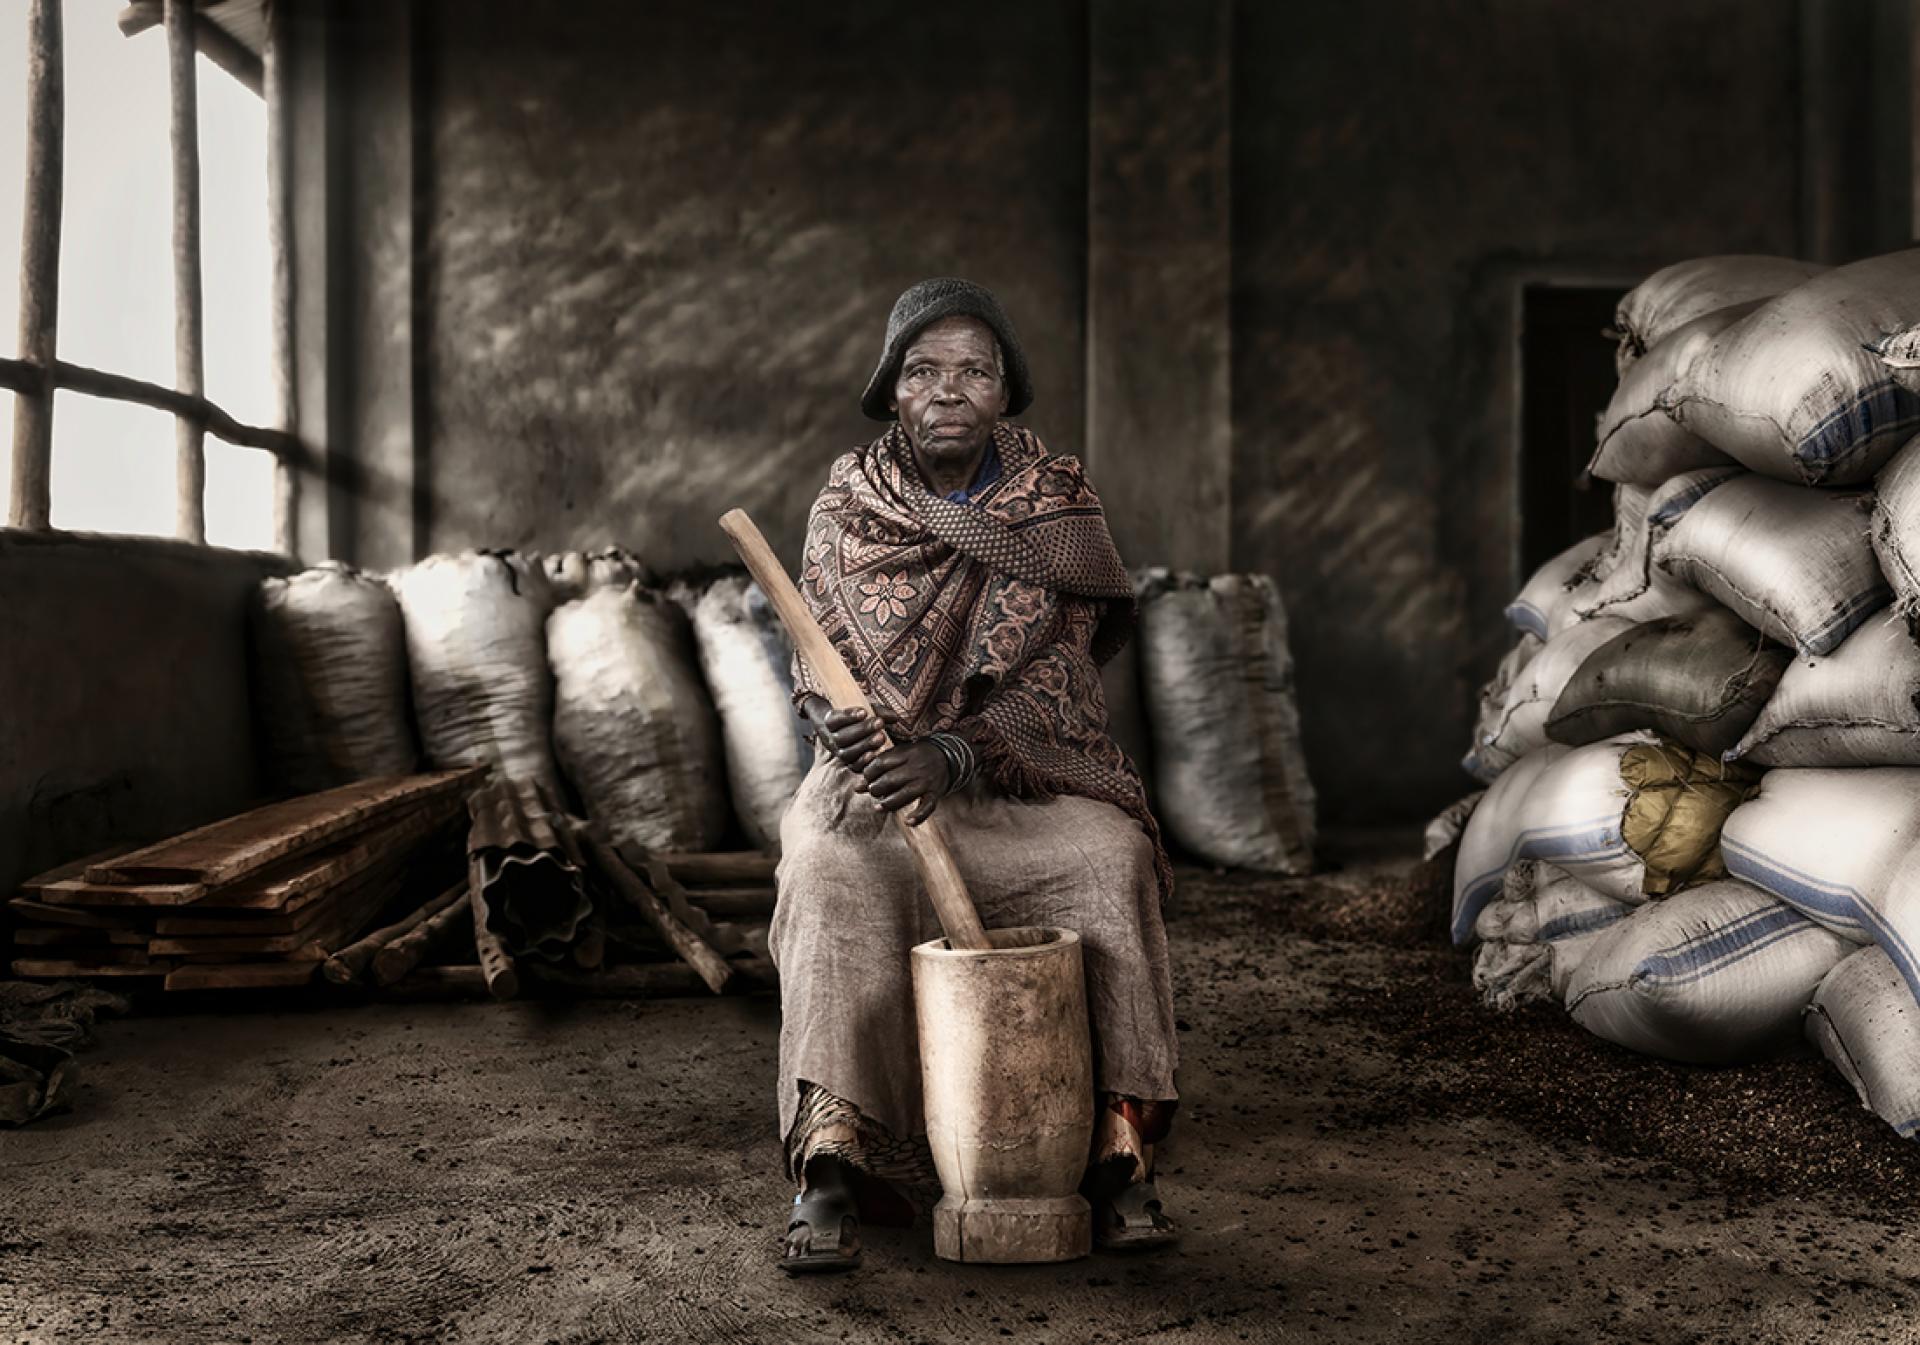 European Photography Awards Winner - wake up and smell the coffee